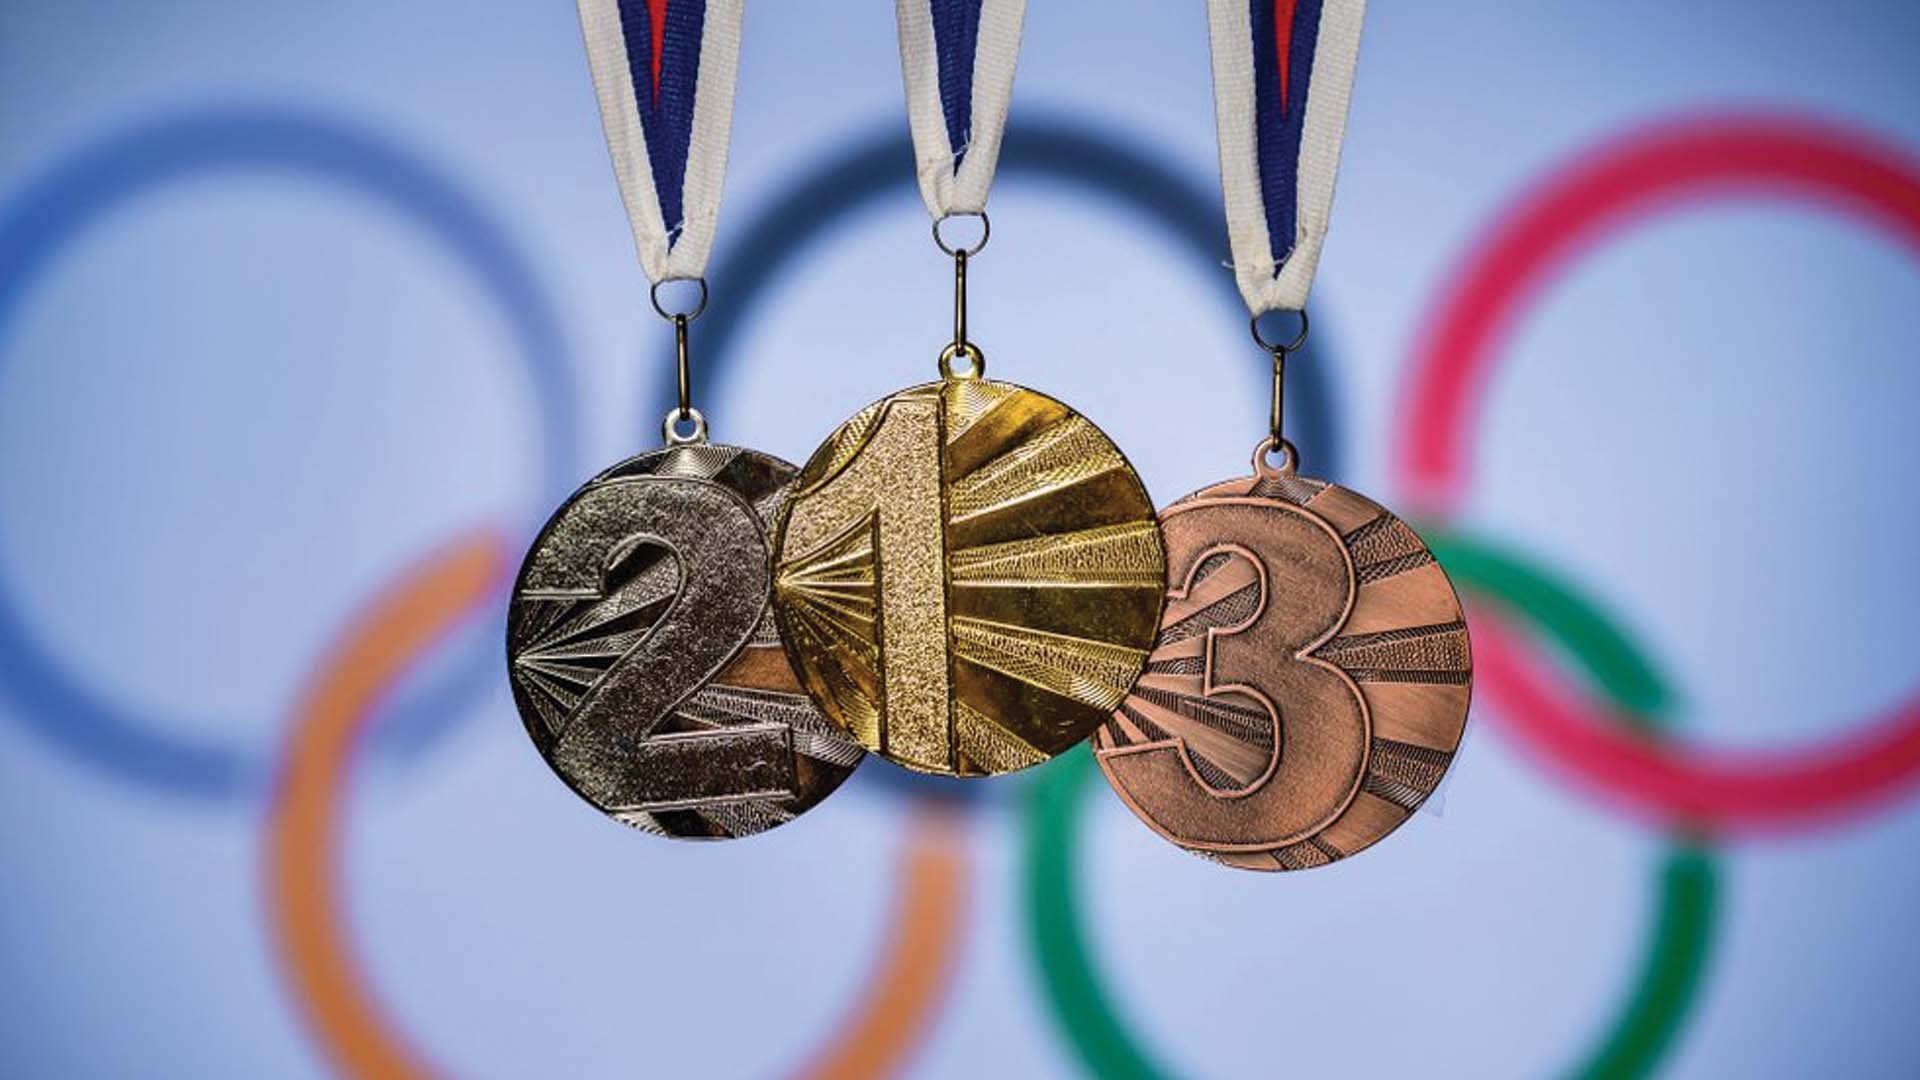 Tokyo 2020 Olympic Games Medals from Recycled Electronics